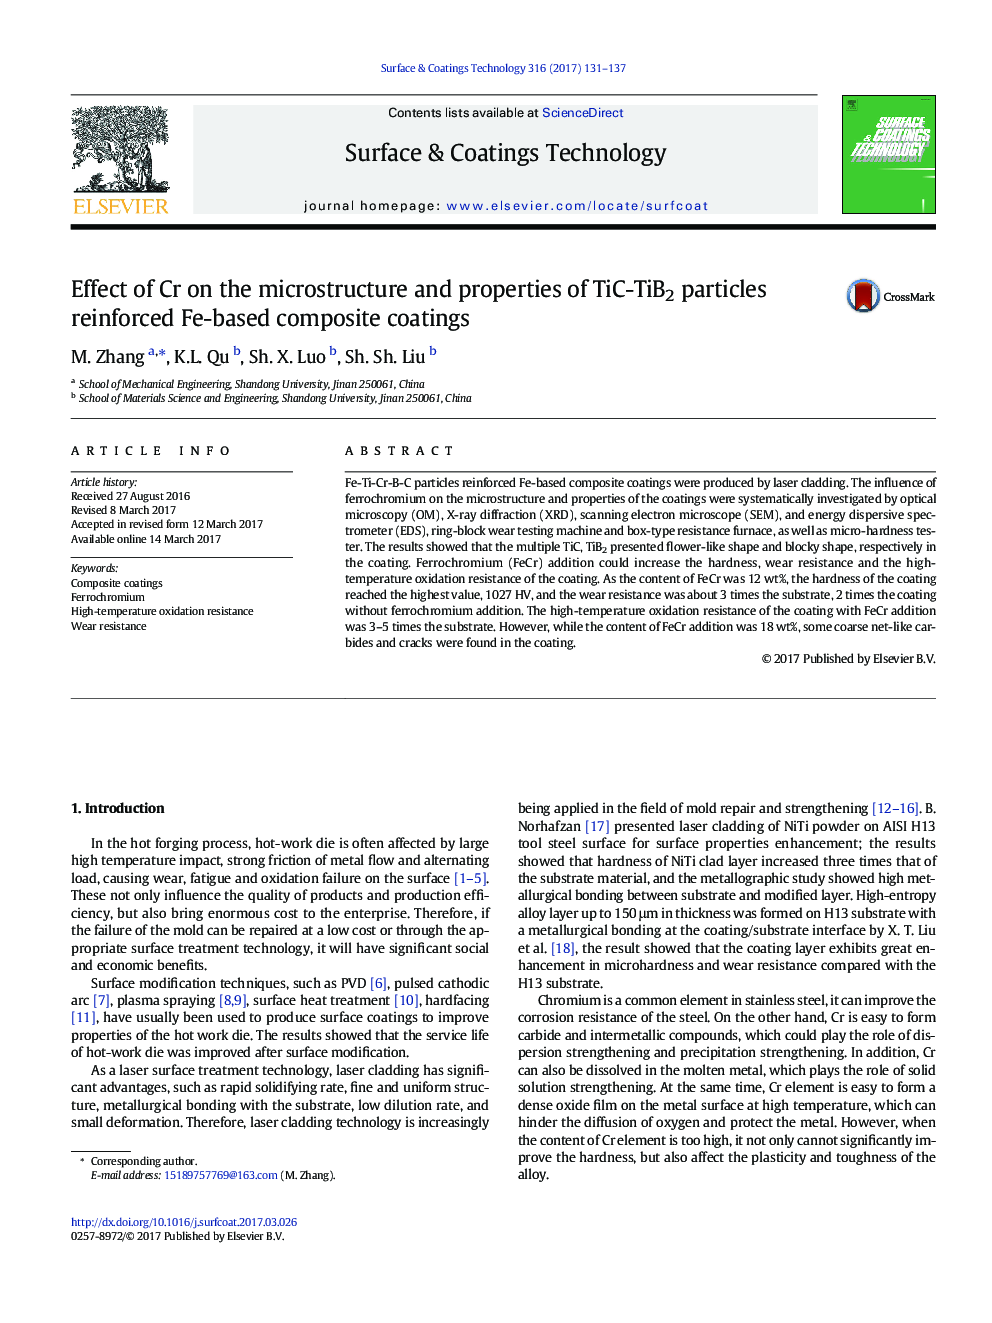 Effect of Cr on the microstructure and properties of TiC-TiB2 particles reinforced Fe-based composite coatings